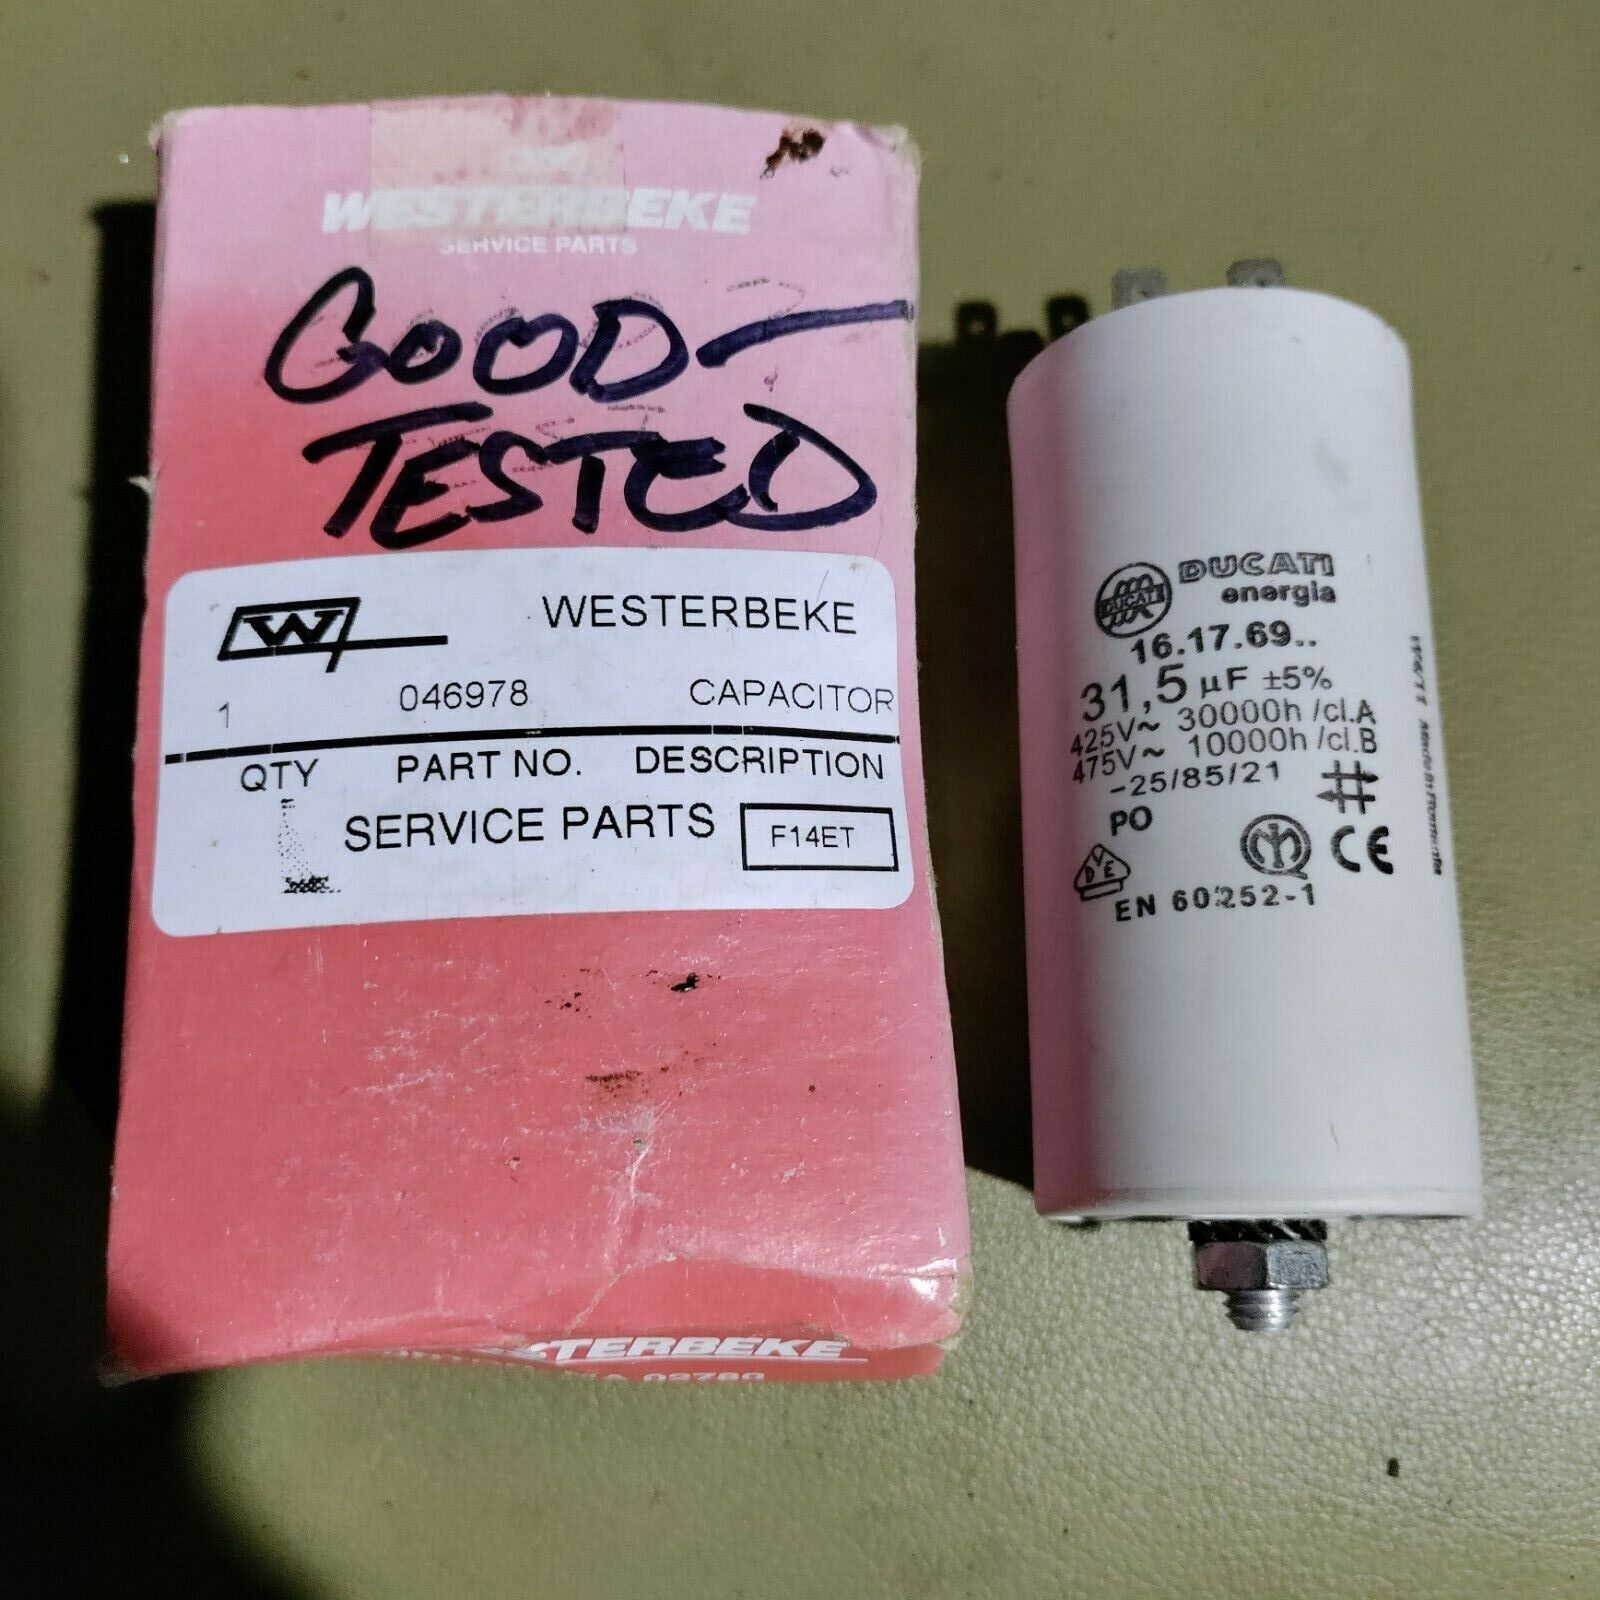 NEW OLD STOCK WESTERBEKE 046978 CAPACITOR   FREE STANDARD SHIPPING